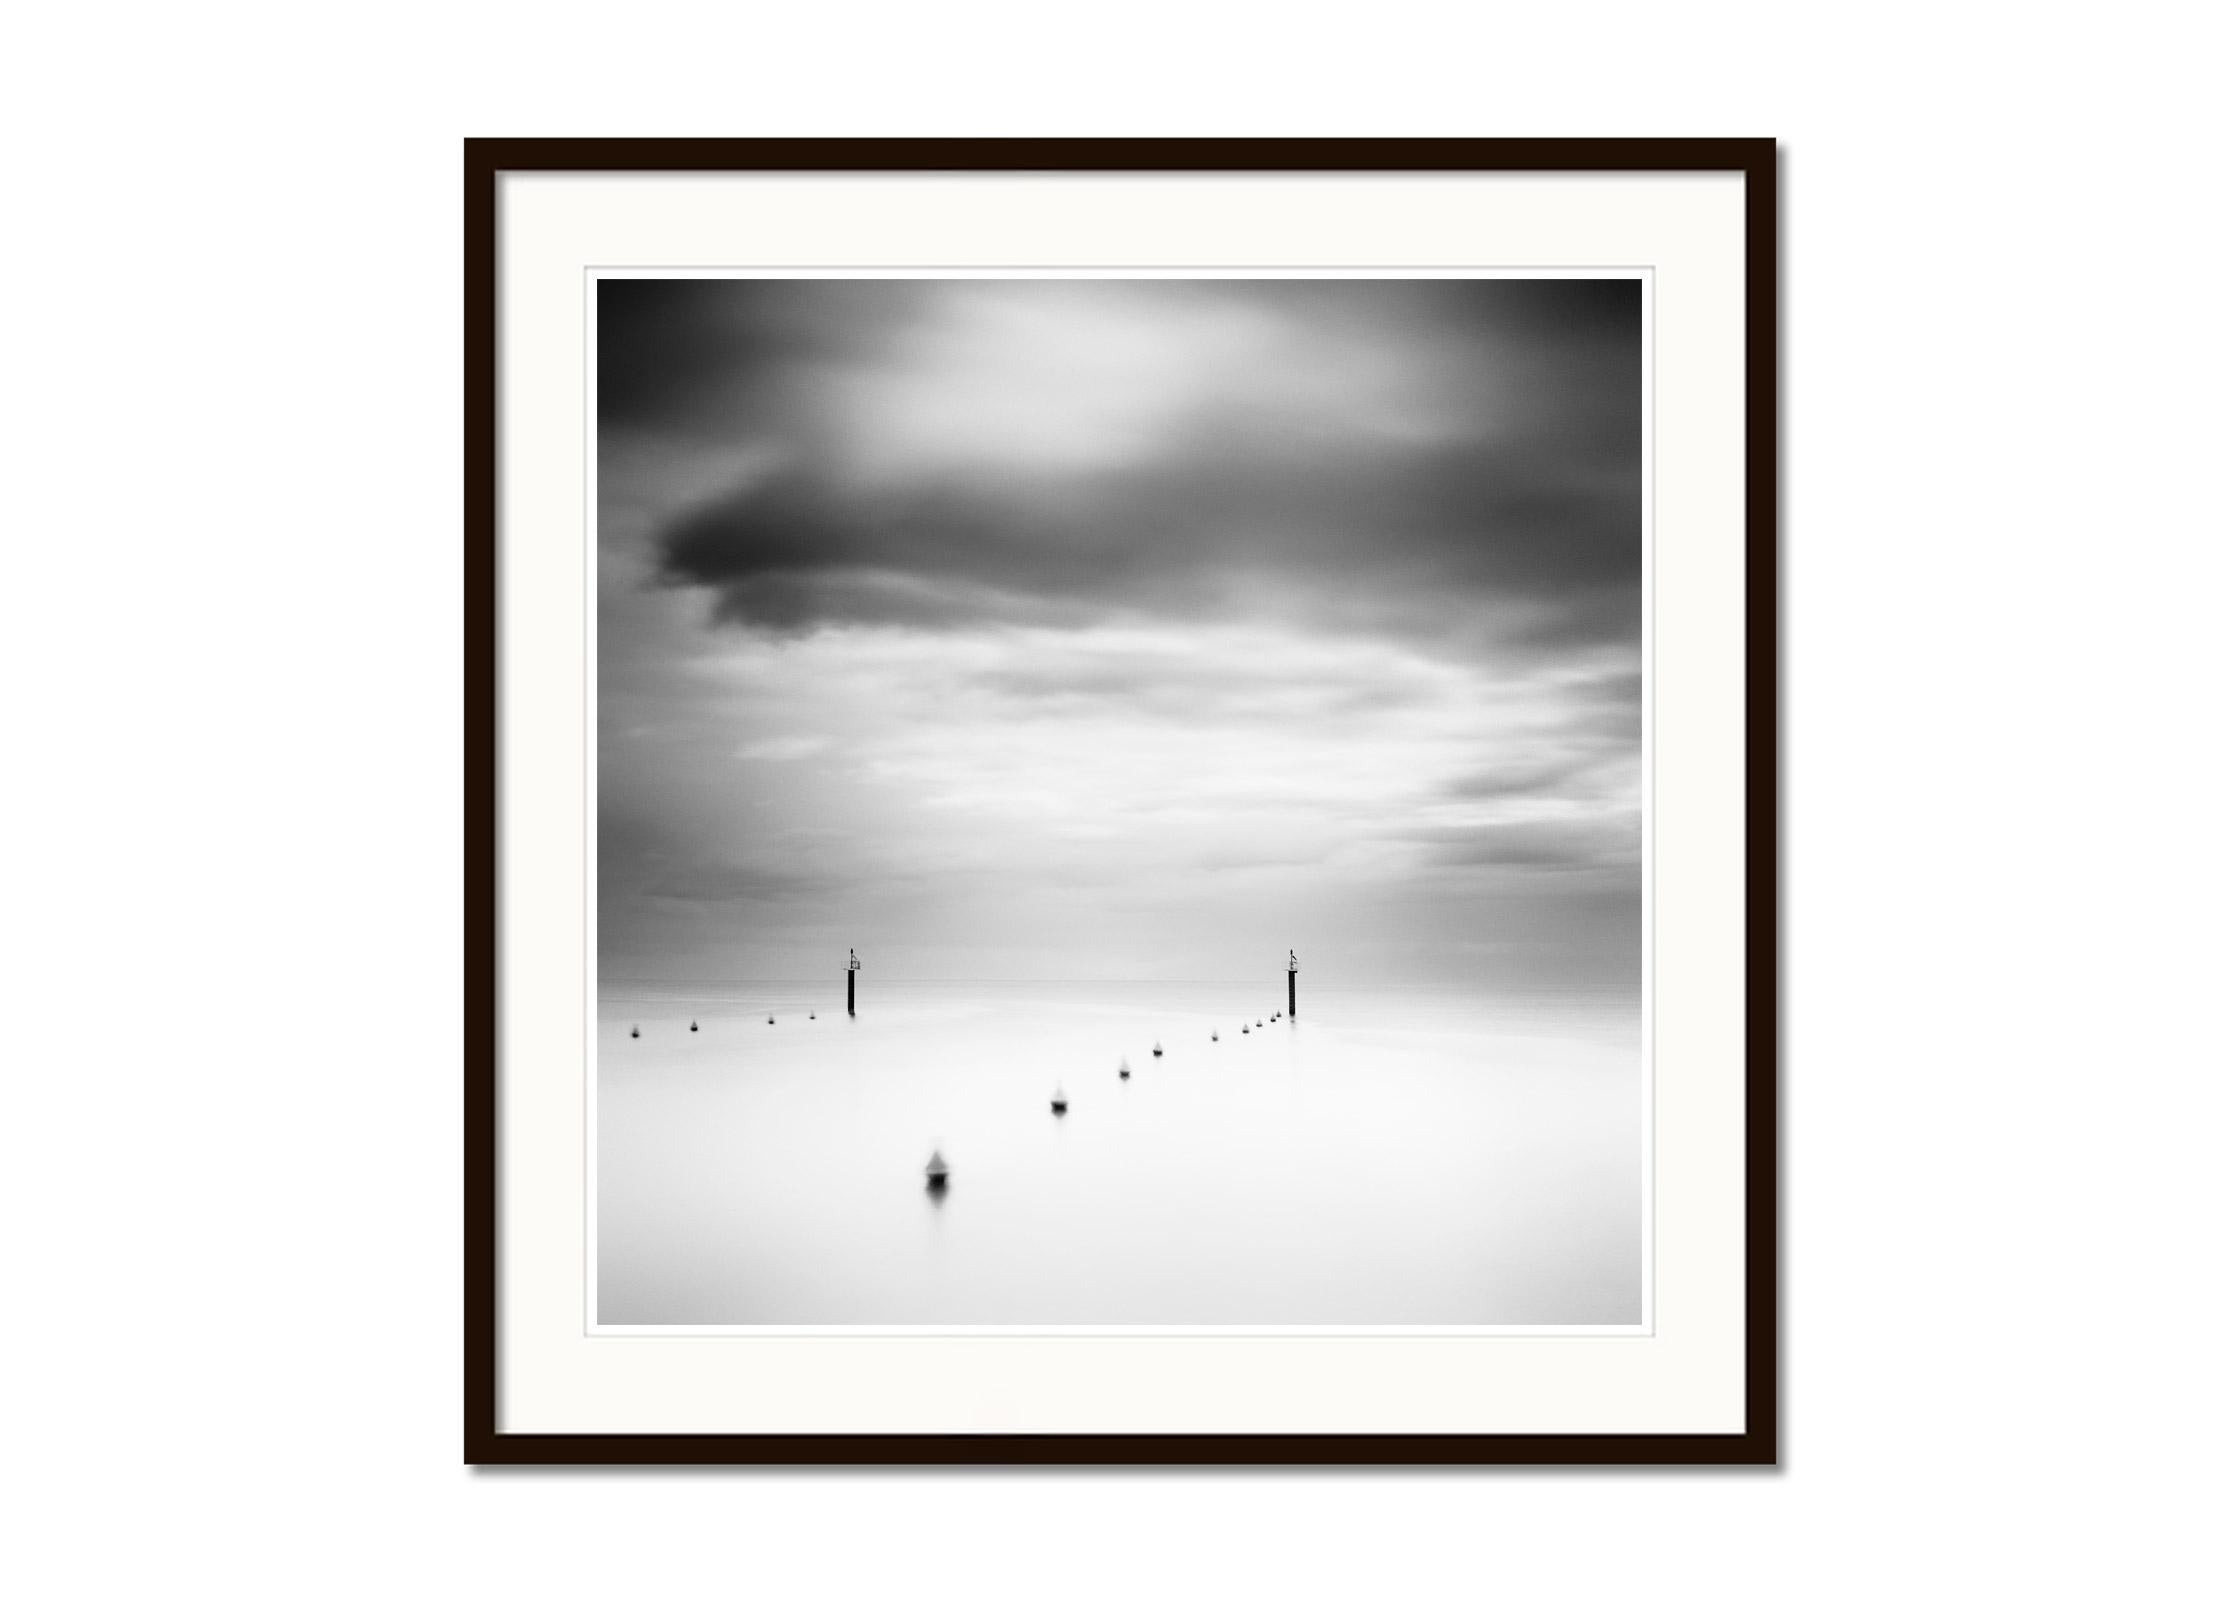 Storm in harbor exit, Greece, Black and White waterscape photography art print - Gray Landscape Photograph by Gerald Berghammer